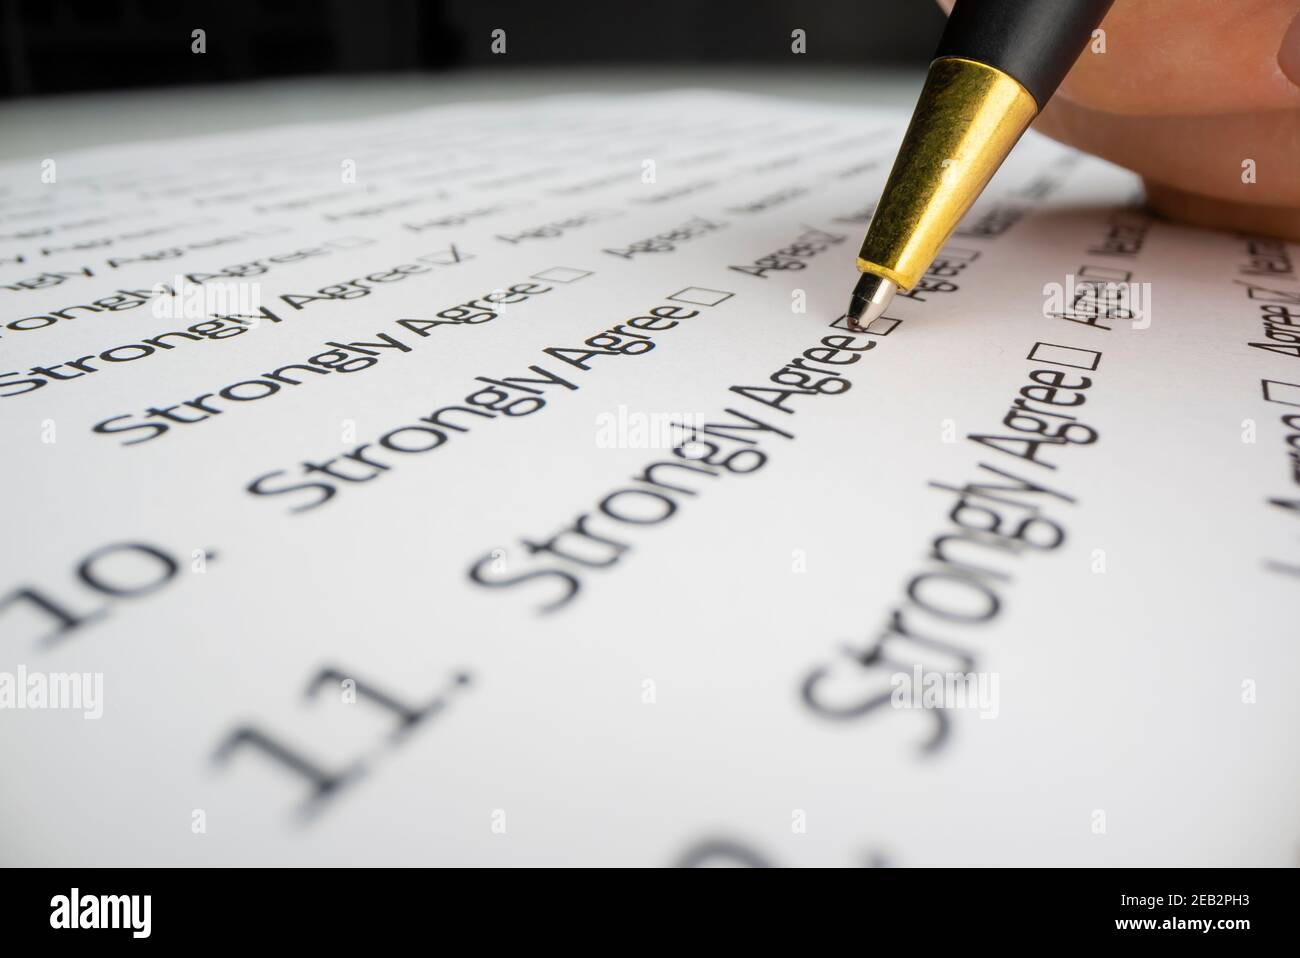 Close-up view of completing a questionnaire Stock Photo